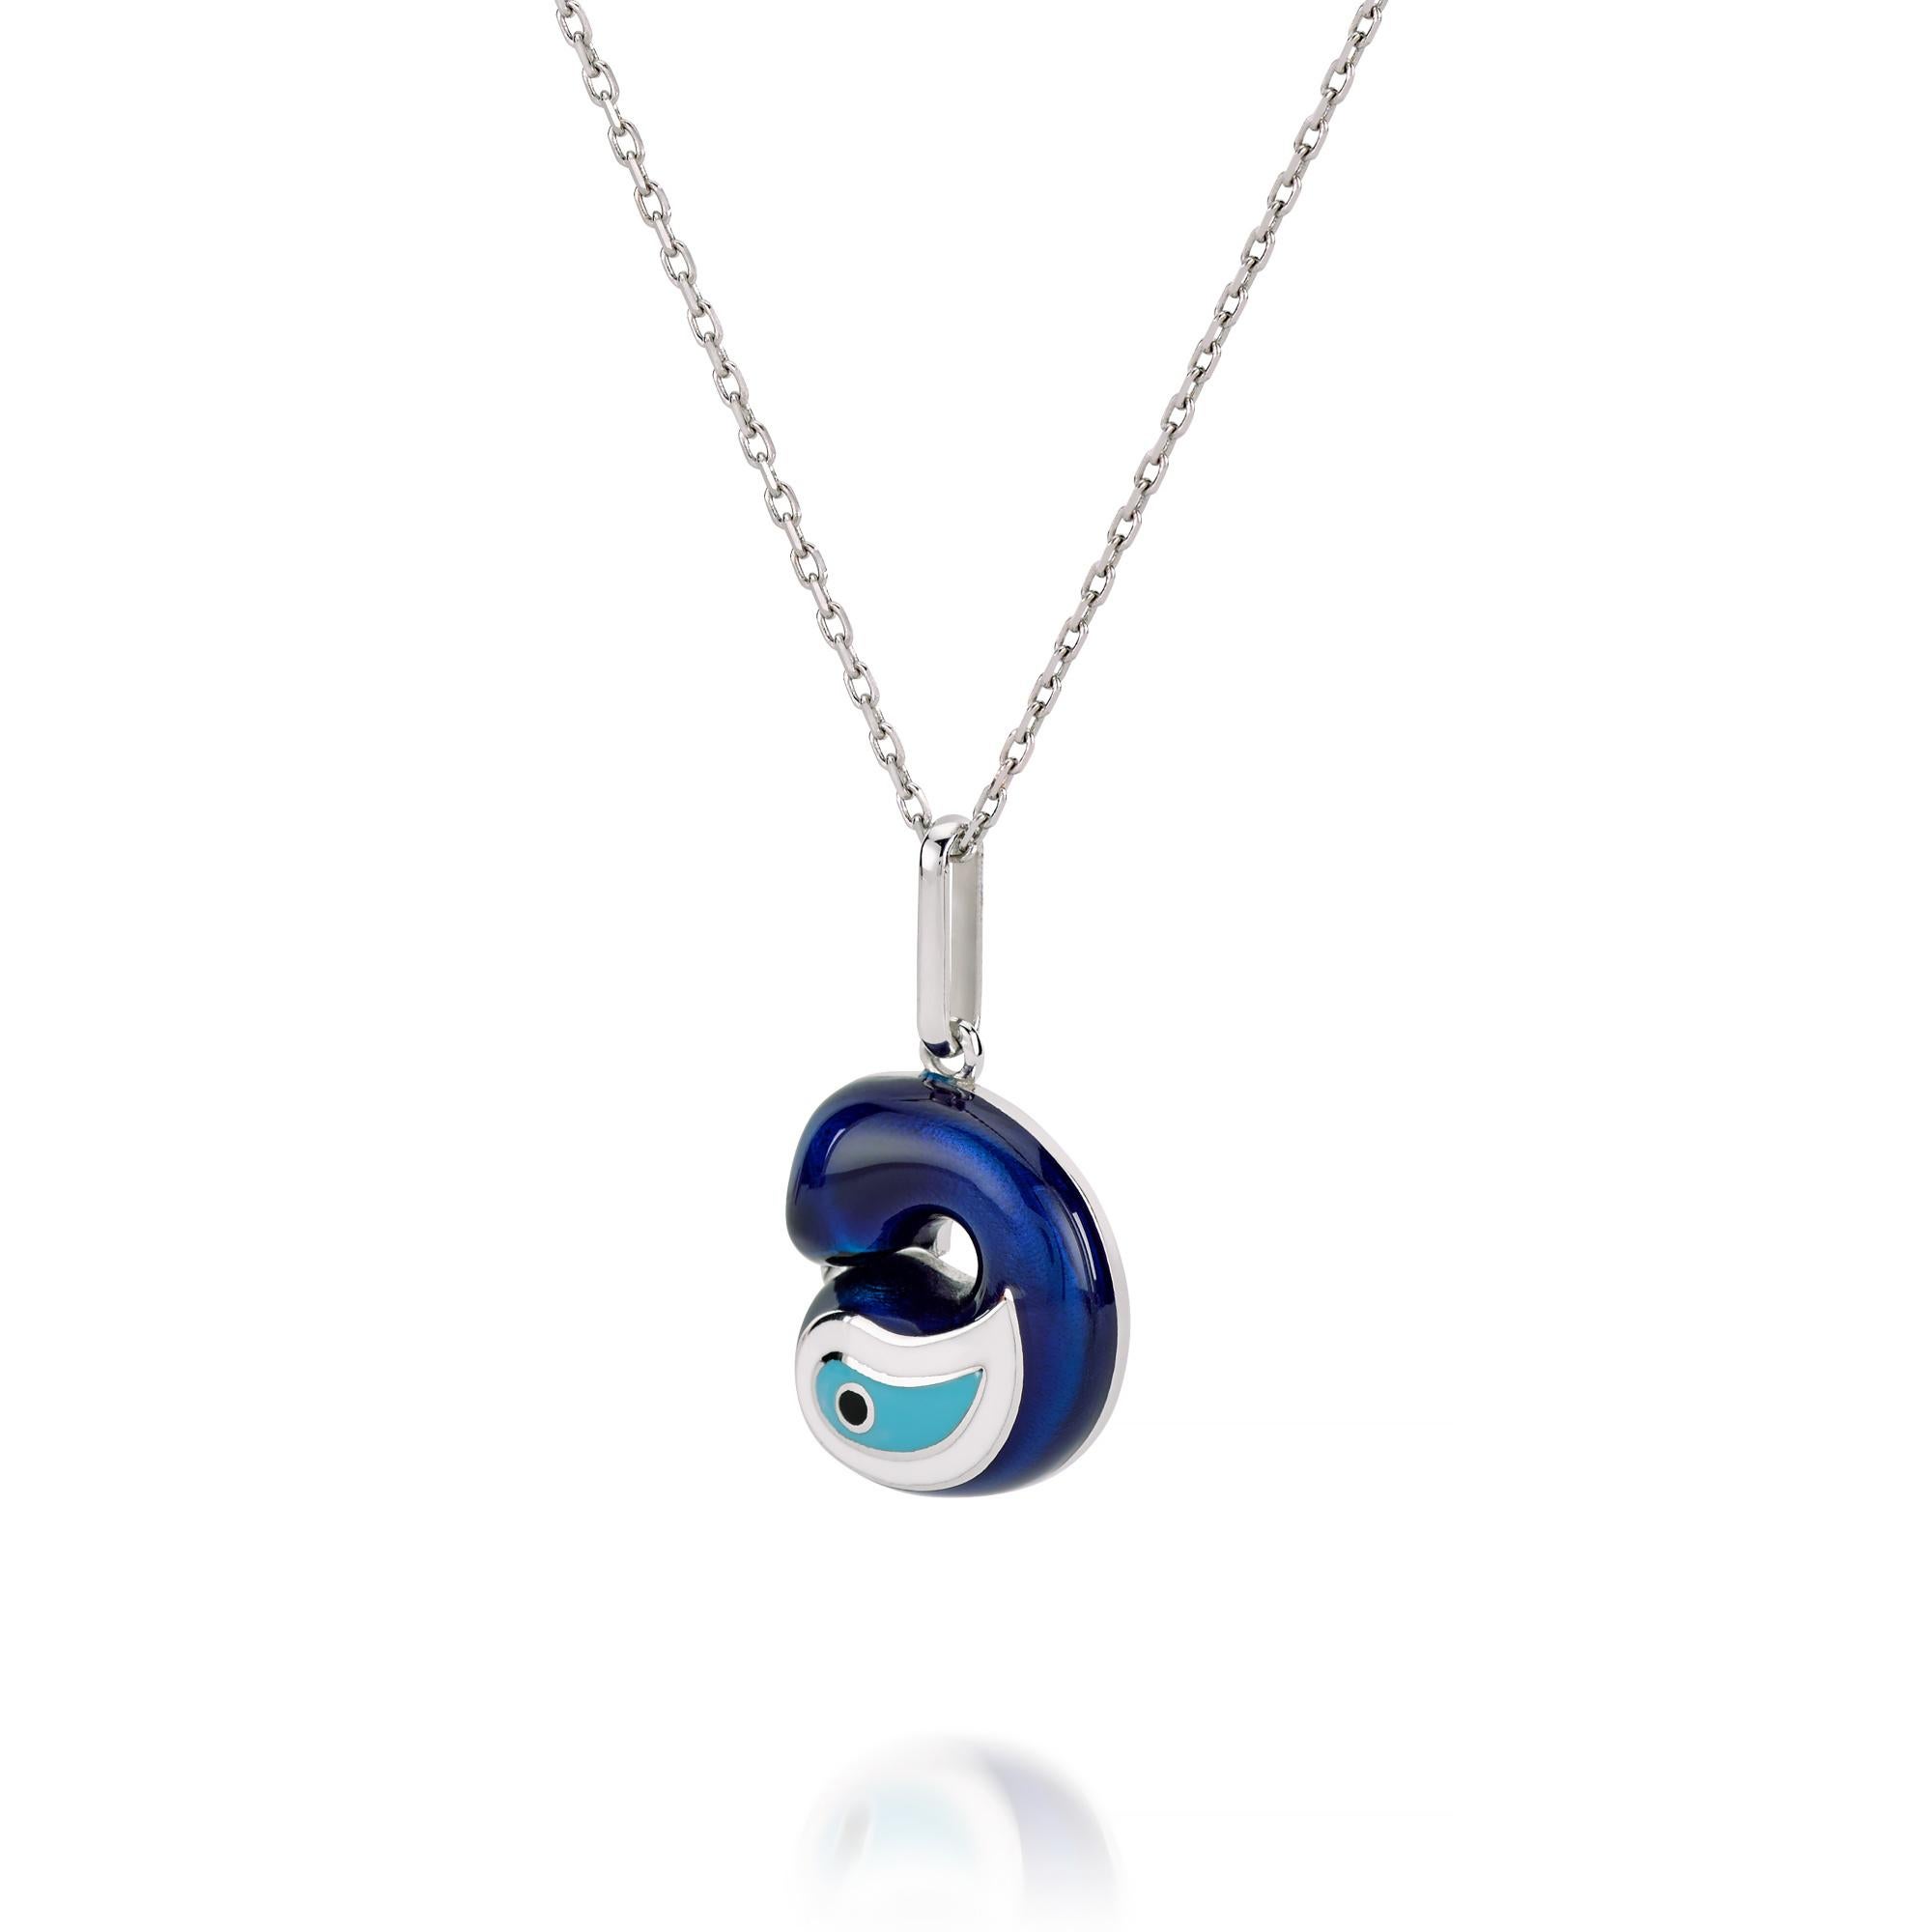 The Nazarlique Evil Eye ID Letter Form, D Charm Handcrafting Blue Enamel Necklace In 14K Gold, Is A Striking Example Of The Sentimental Style.
Beautifully Timeless And Personal To Each Wearer, Initial D Pendant Necklace Was Designed To Be Treasured